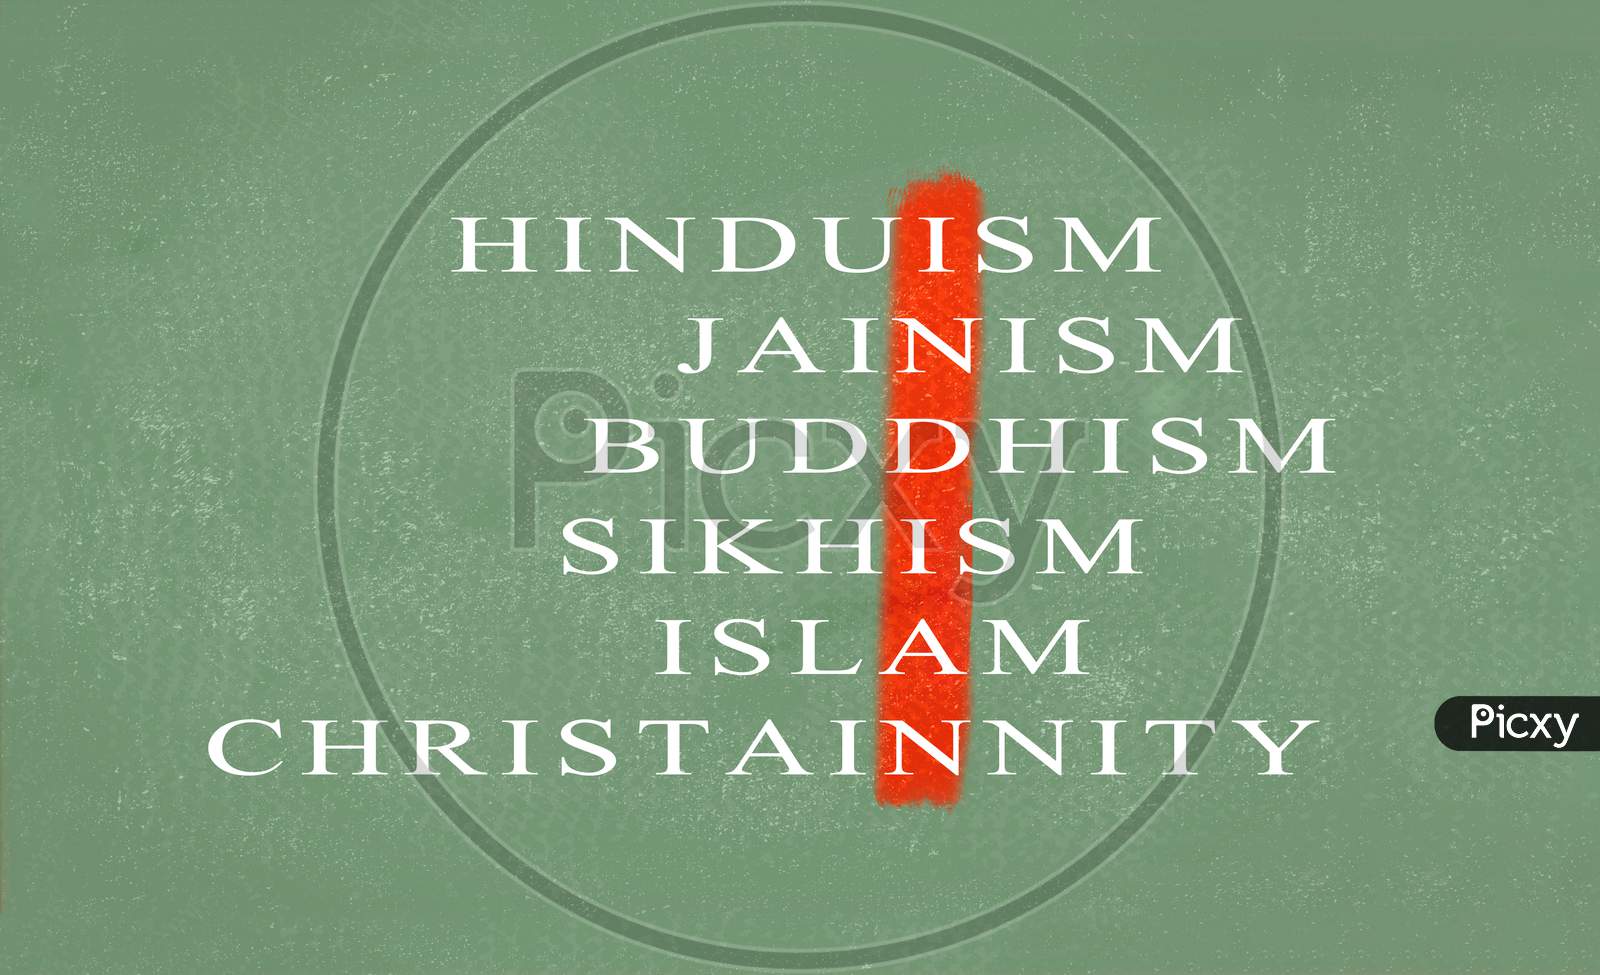 Concept Of Unity In Diversity Of India Showing With Different Religions On Green Chalkboard